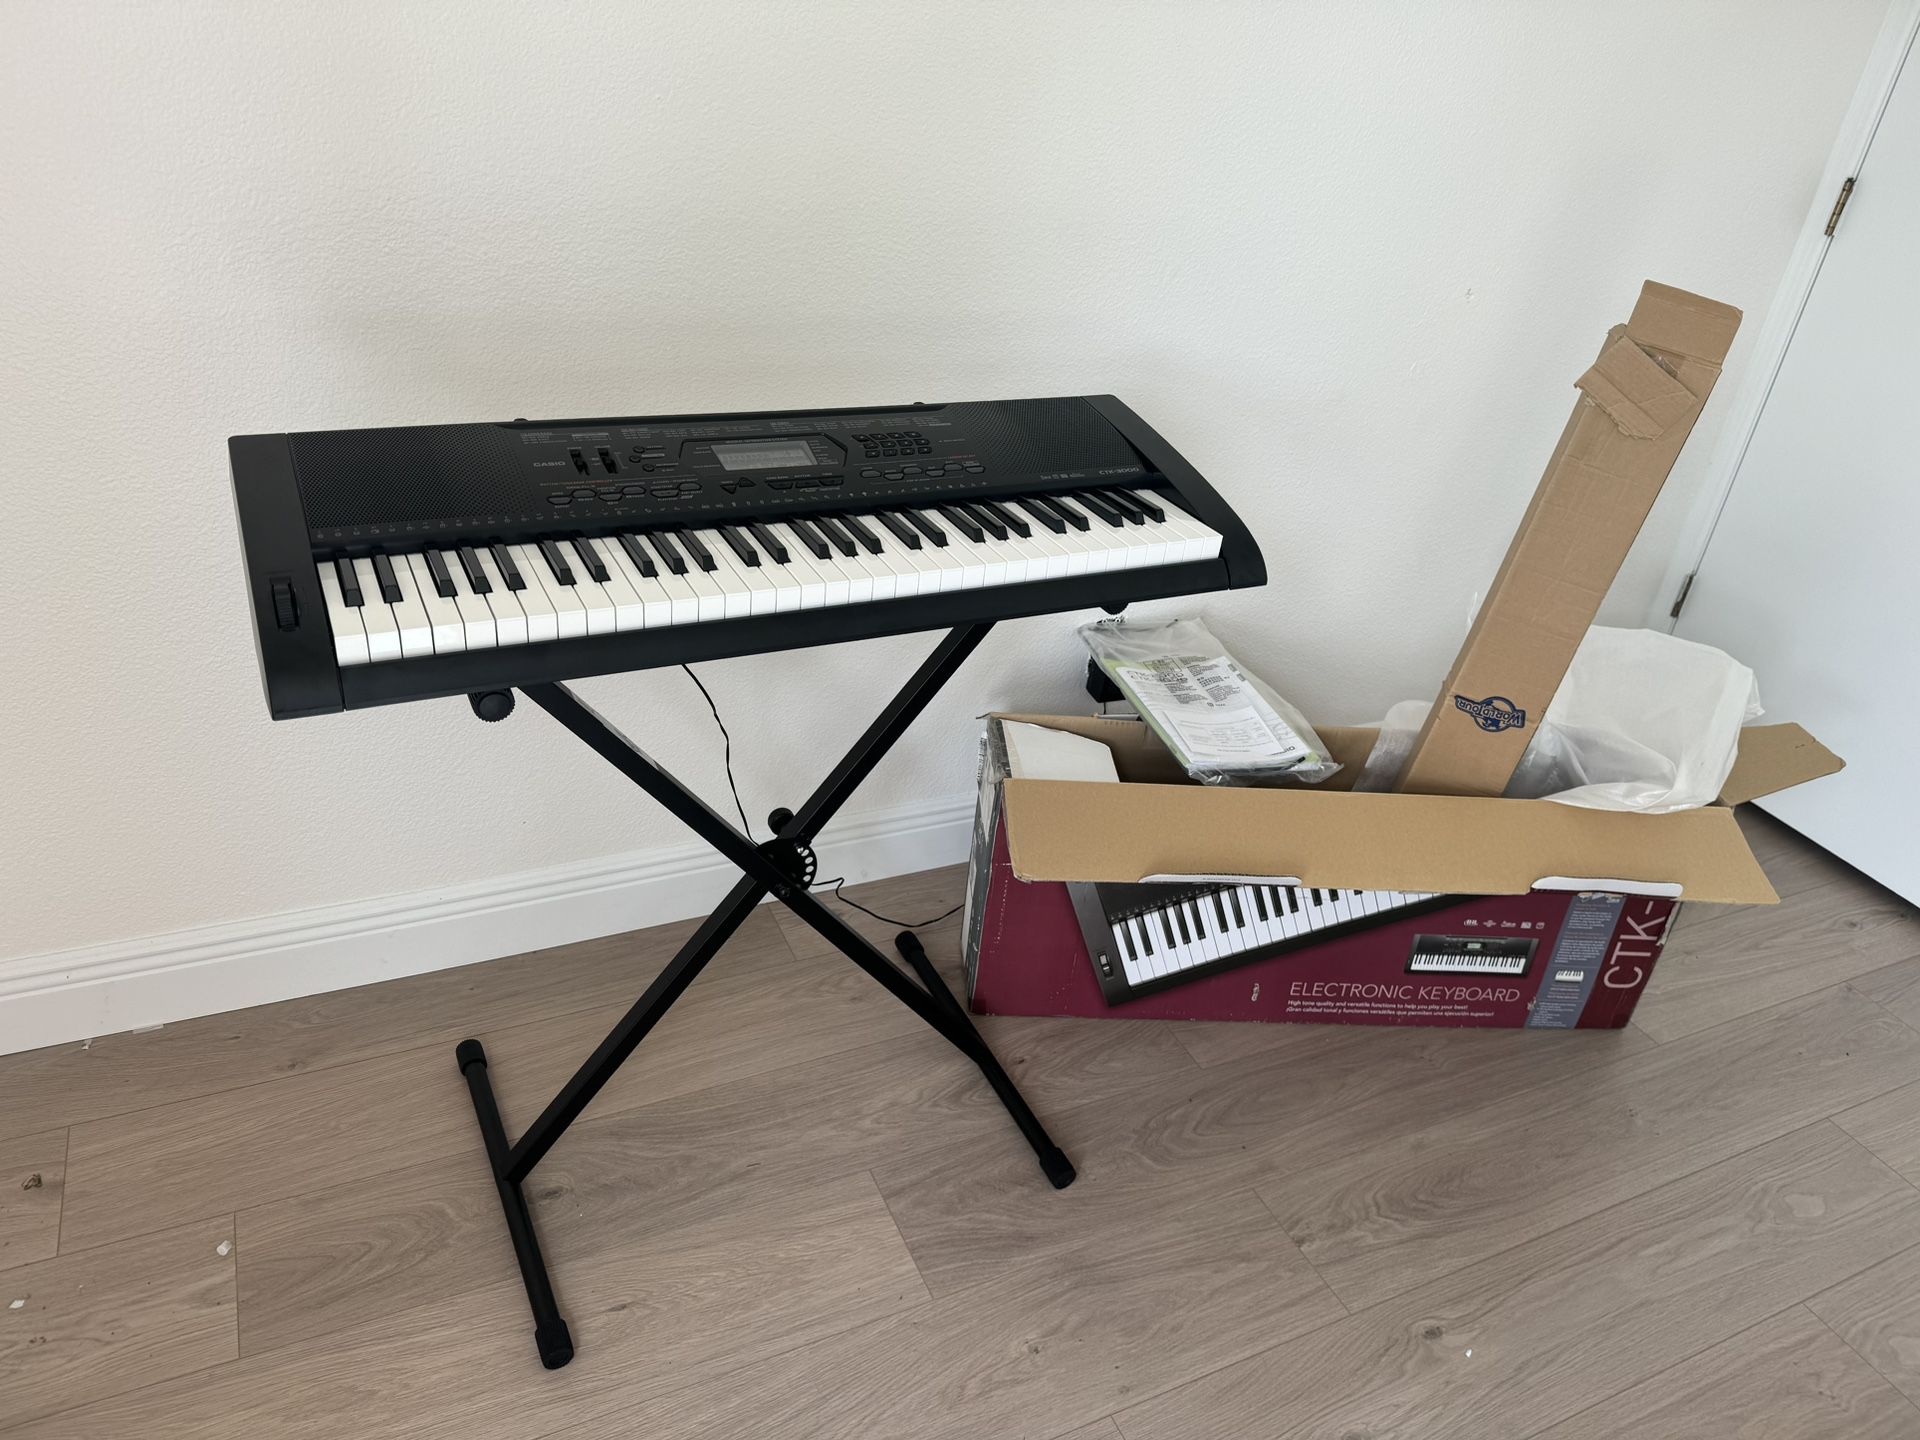 Casio CTK-3000 Keyboard With stand